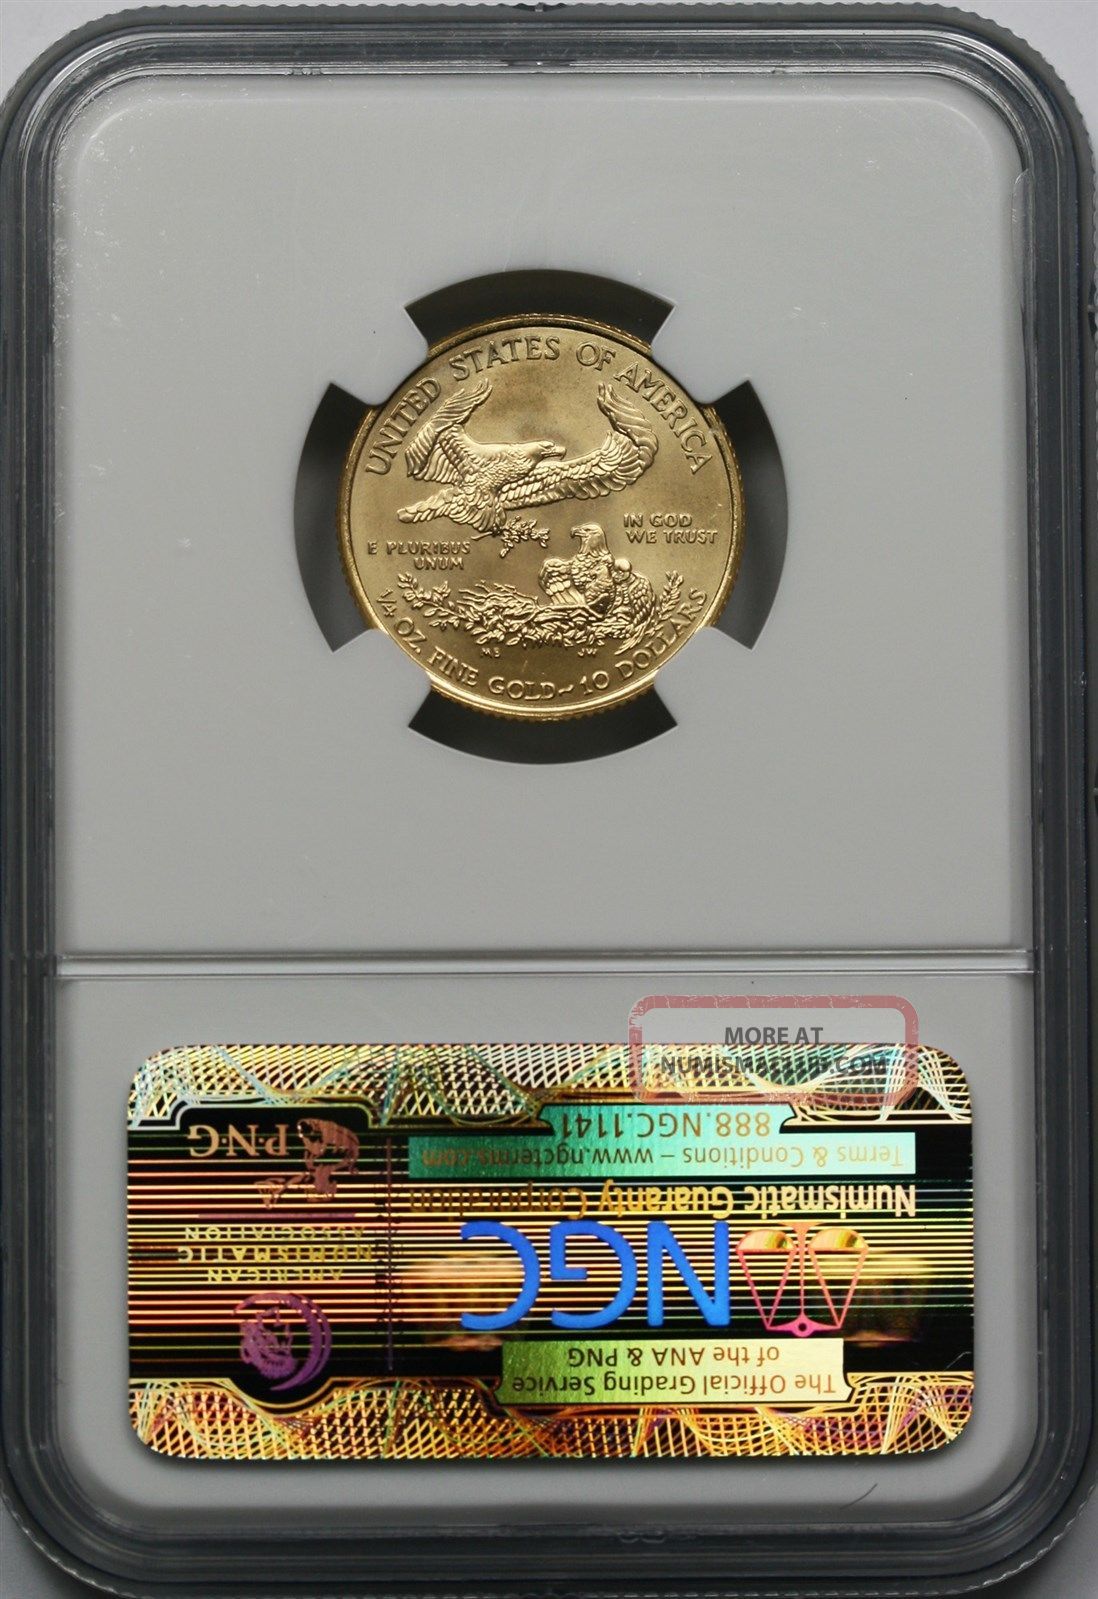 2009 Early Releases Gold Eagle $10 Quarter - Ounce Ms 69 Ngc 1/4 Oz